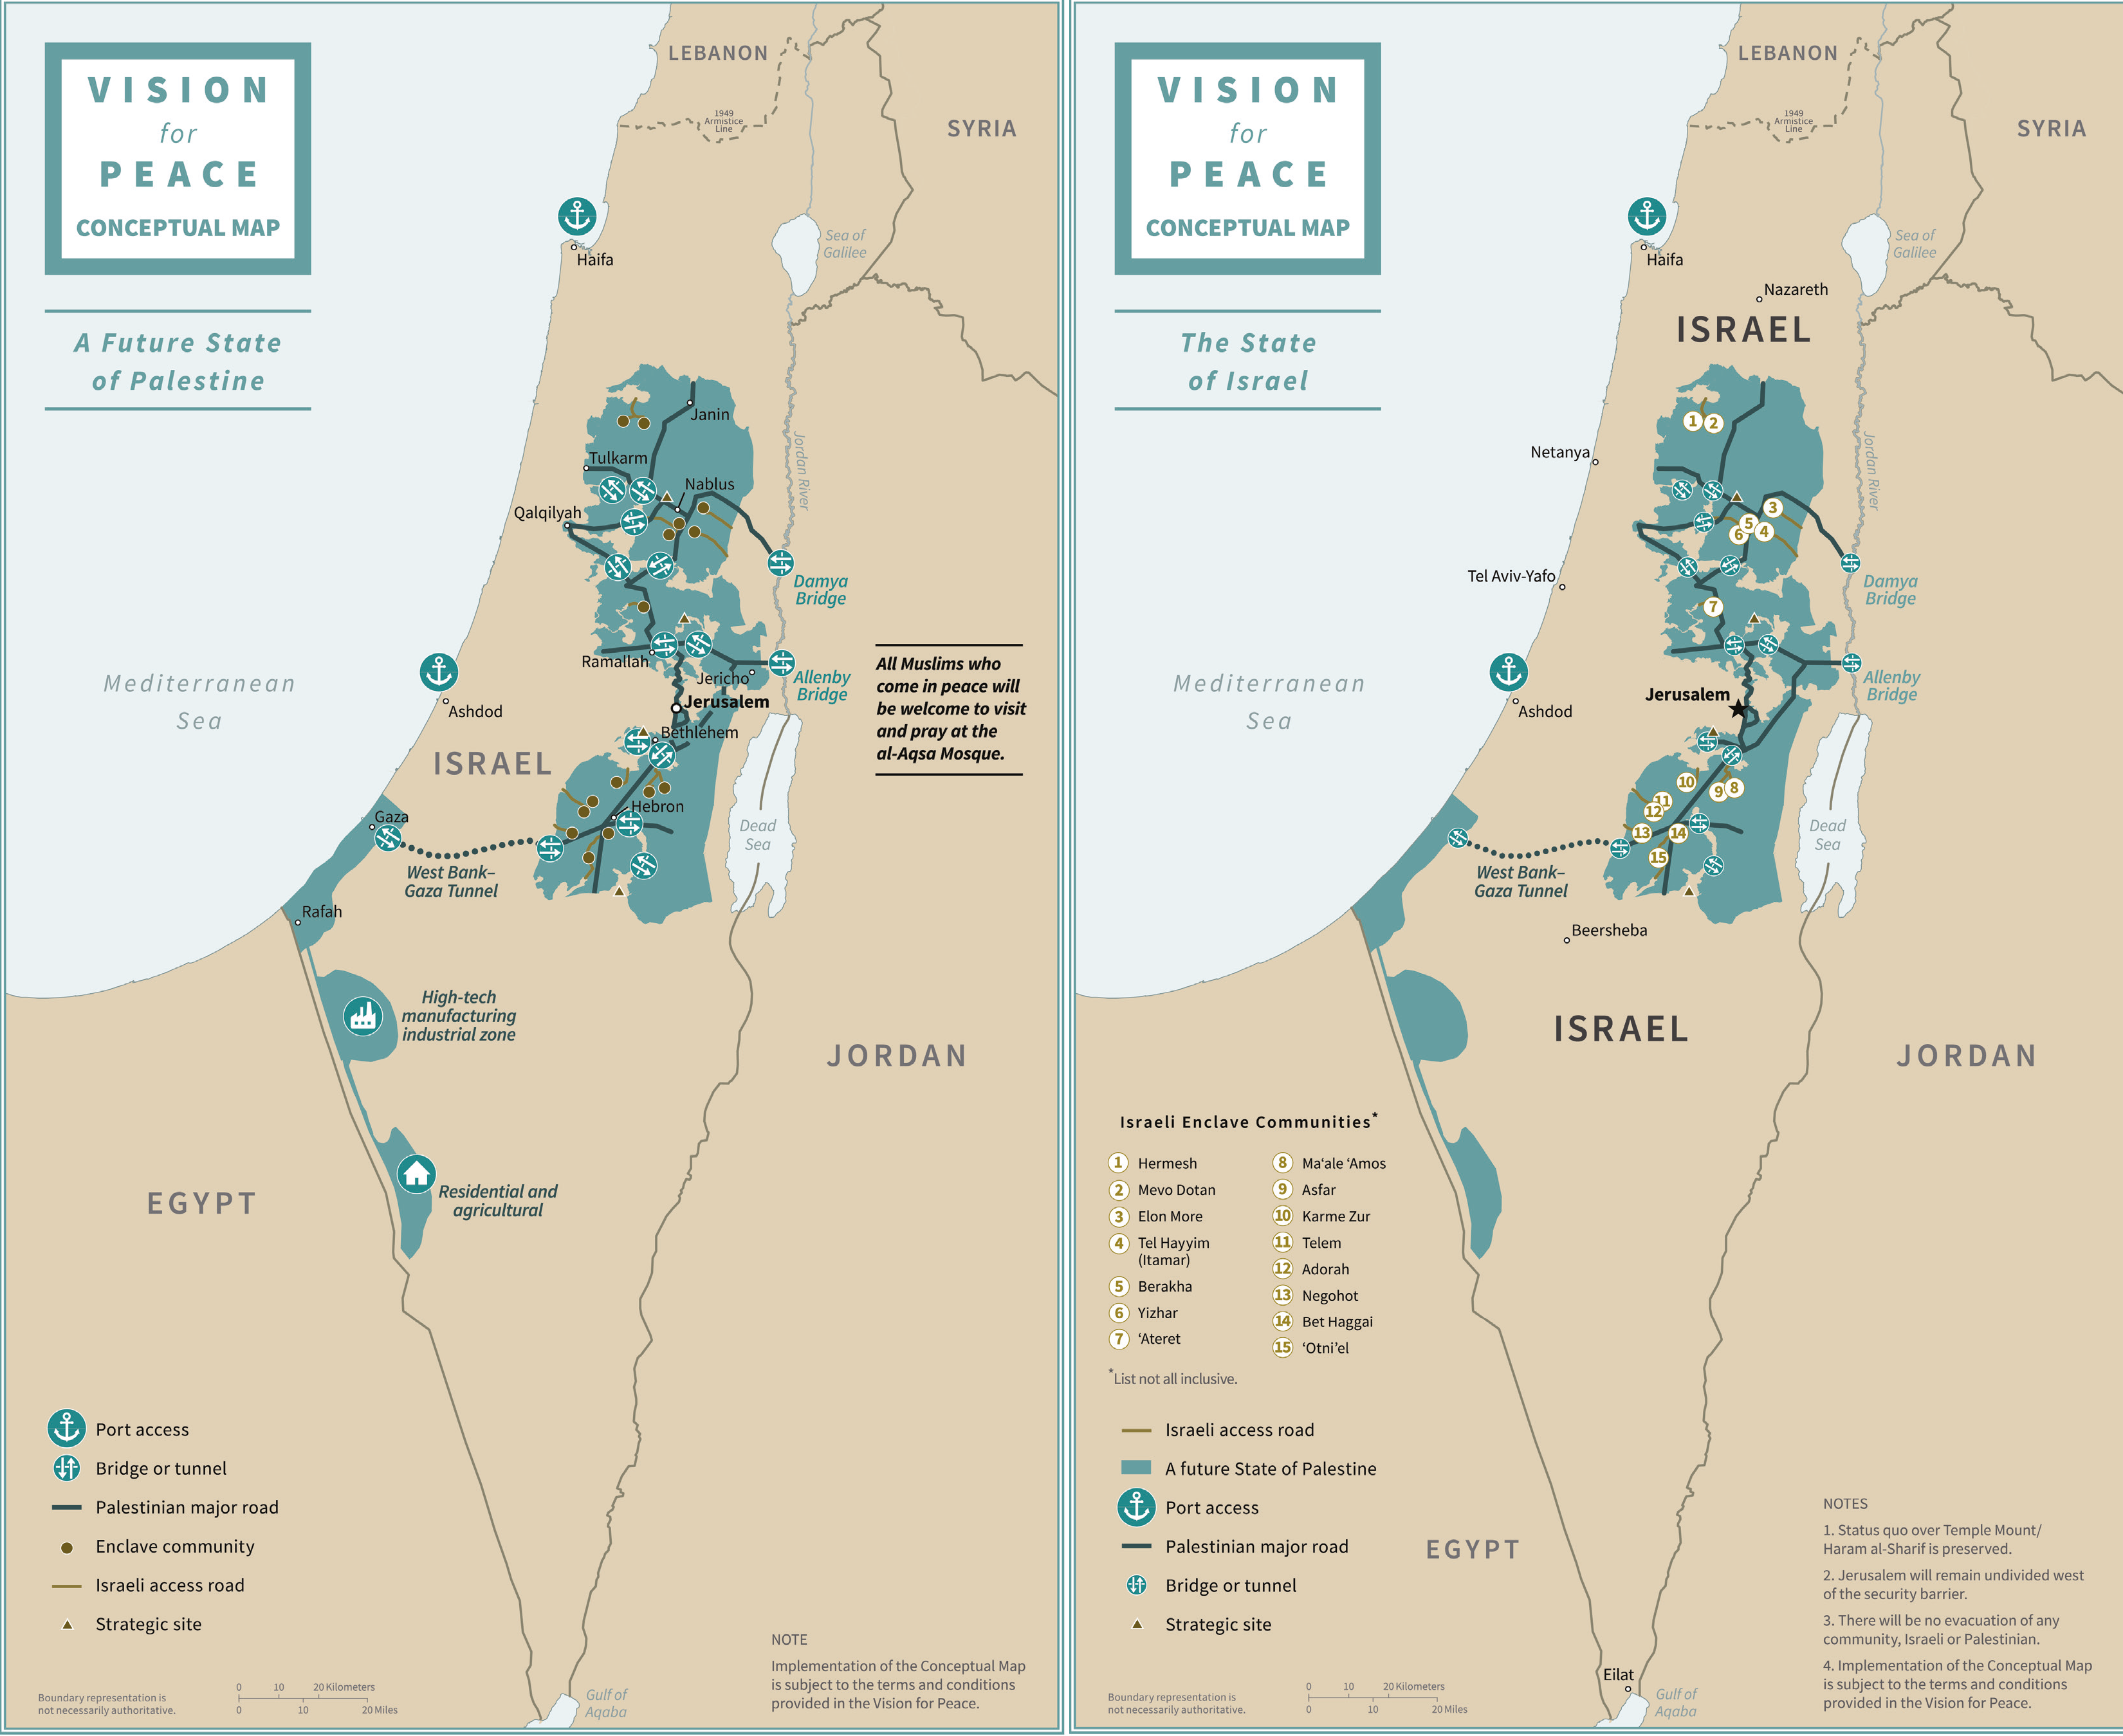 This map shows how the Trump plan would carve up the Palestinian territories